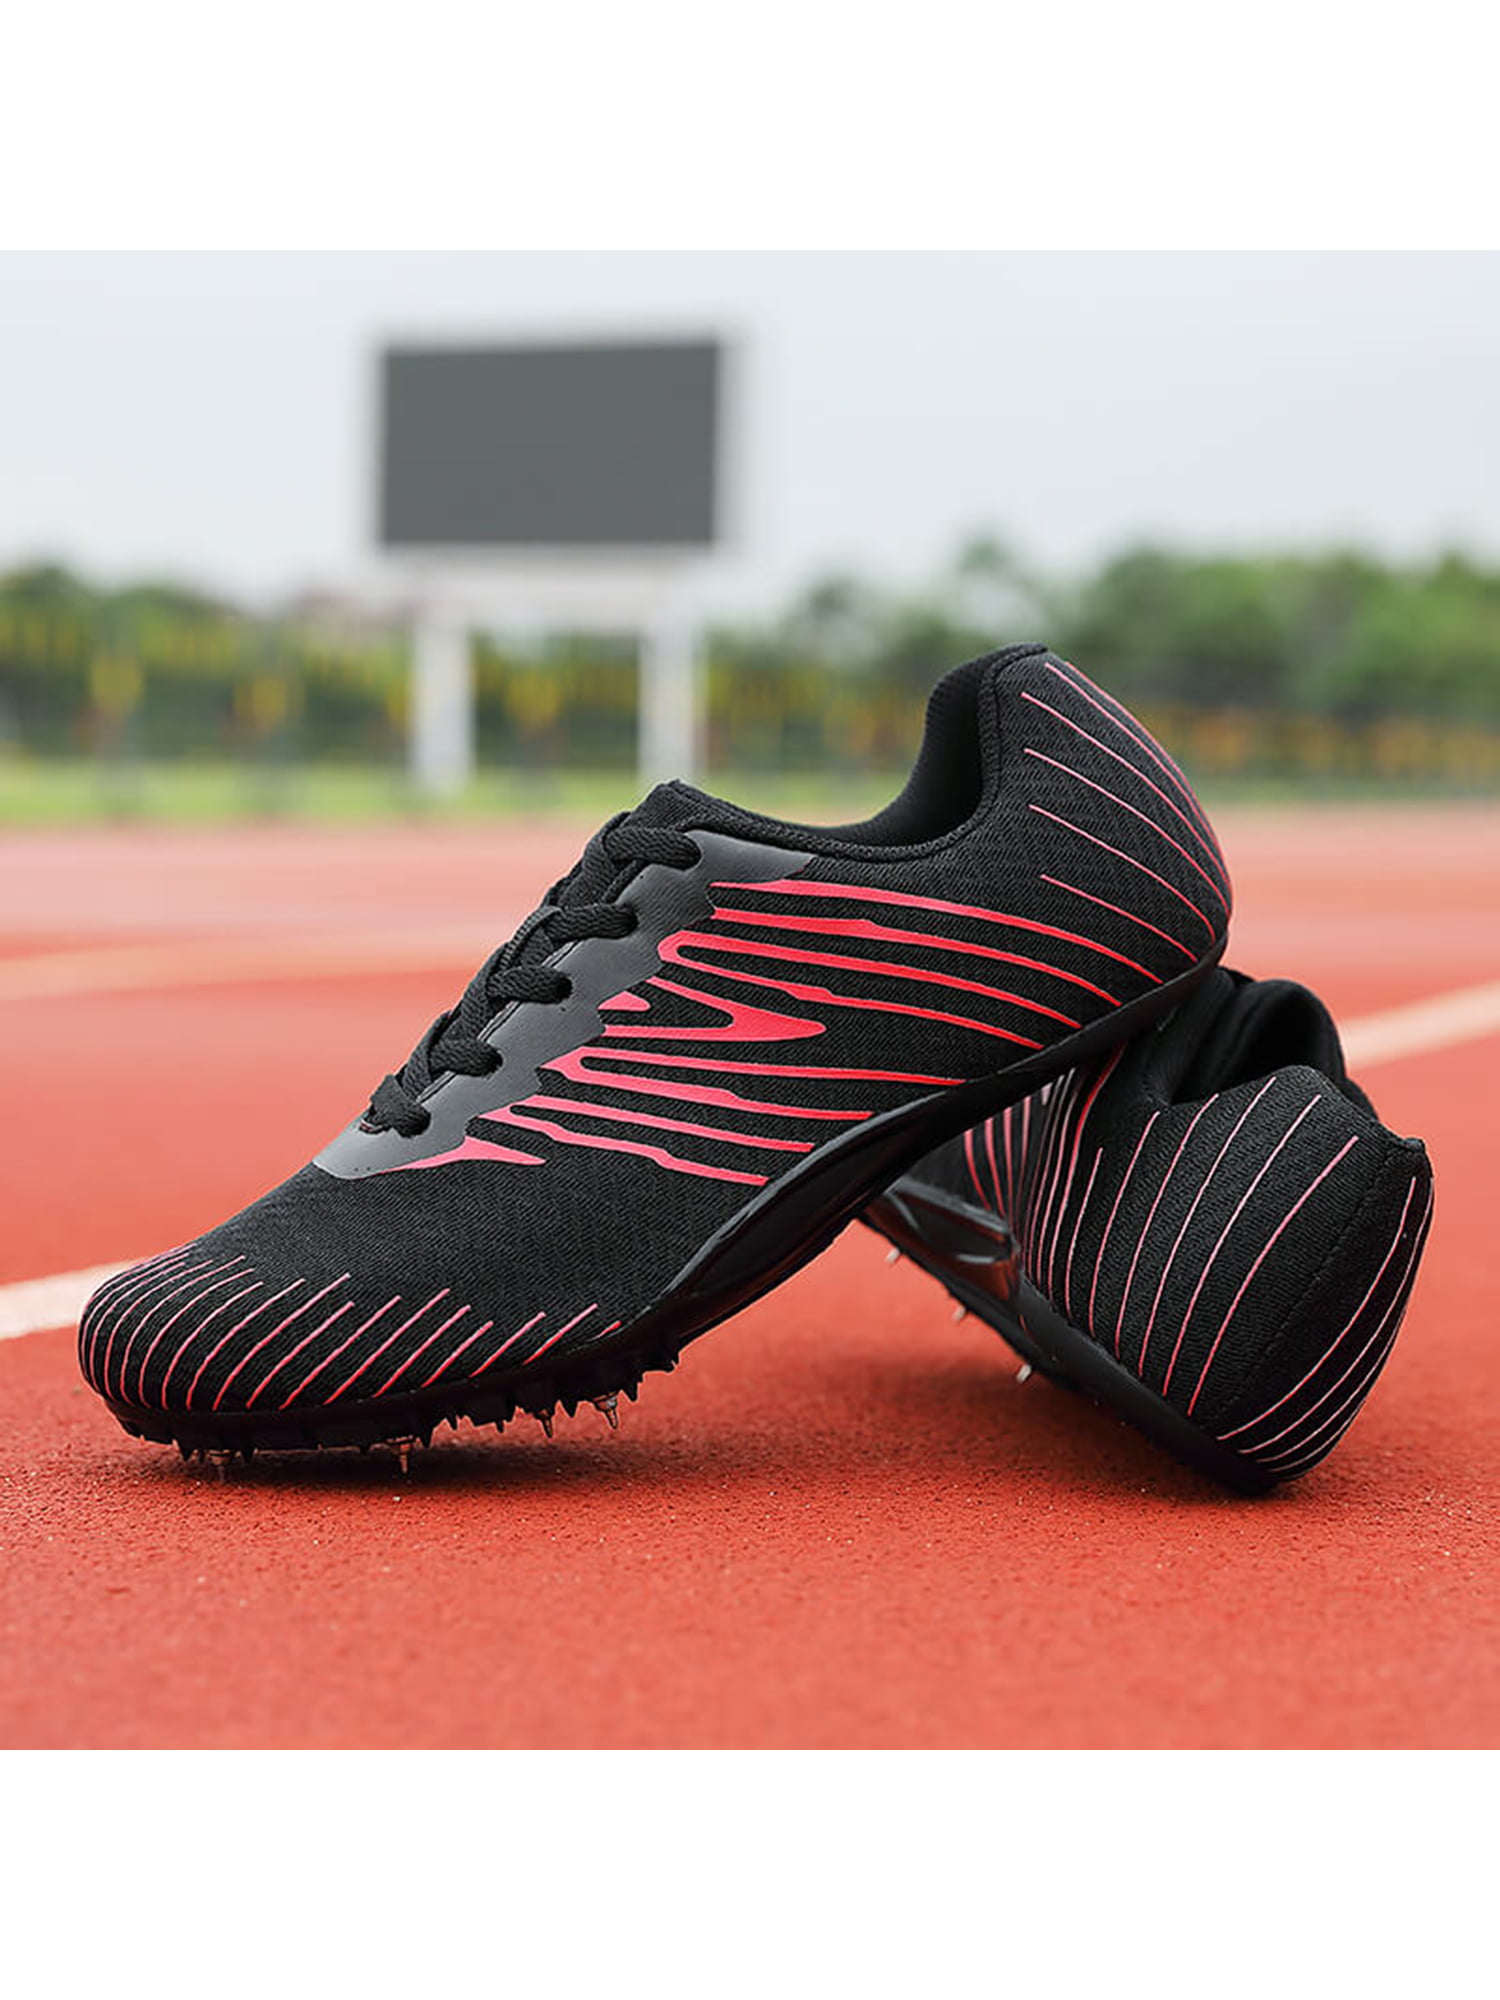 Mikrydco Spikes Track Shoes for Men Field Racing Jumping Sprint Sneakers  Women Youth Boys Girls Professional Running Training Athletic Cleats